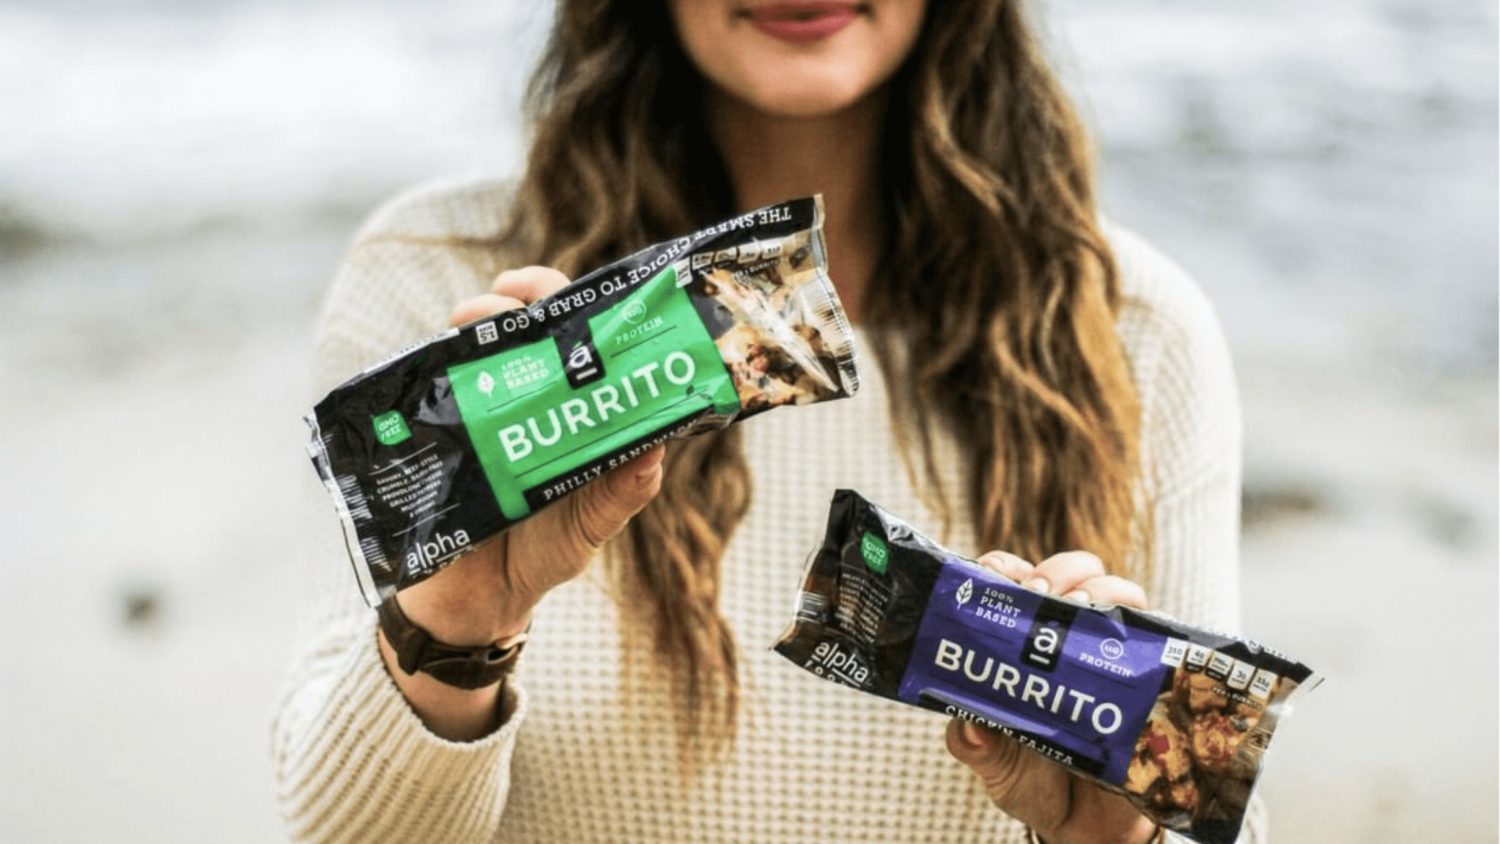 Vegan Snack Market Value to Exceed $73 Billion By 2028